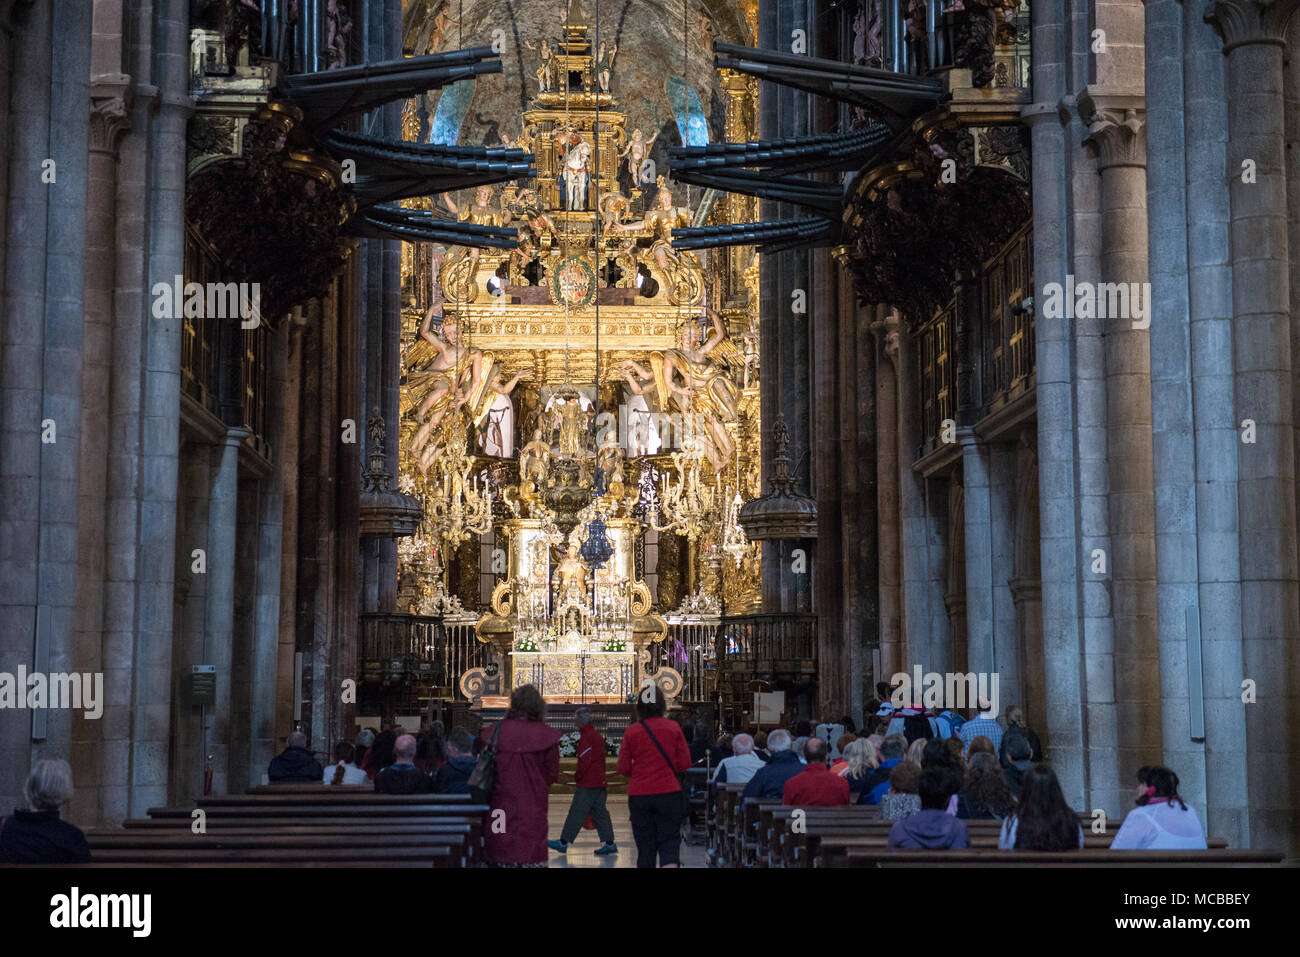 Altar of the cathedral of Santiago de Compostela Stock Photo